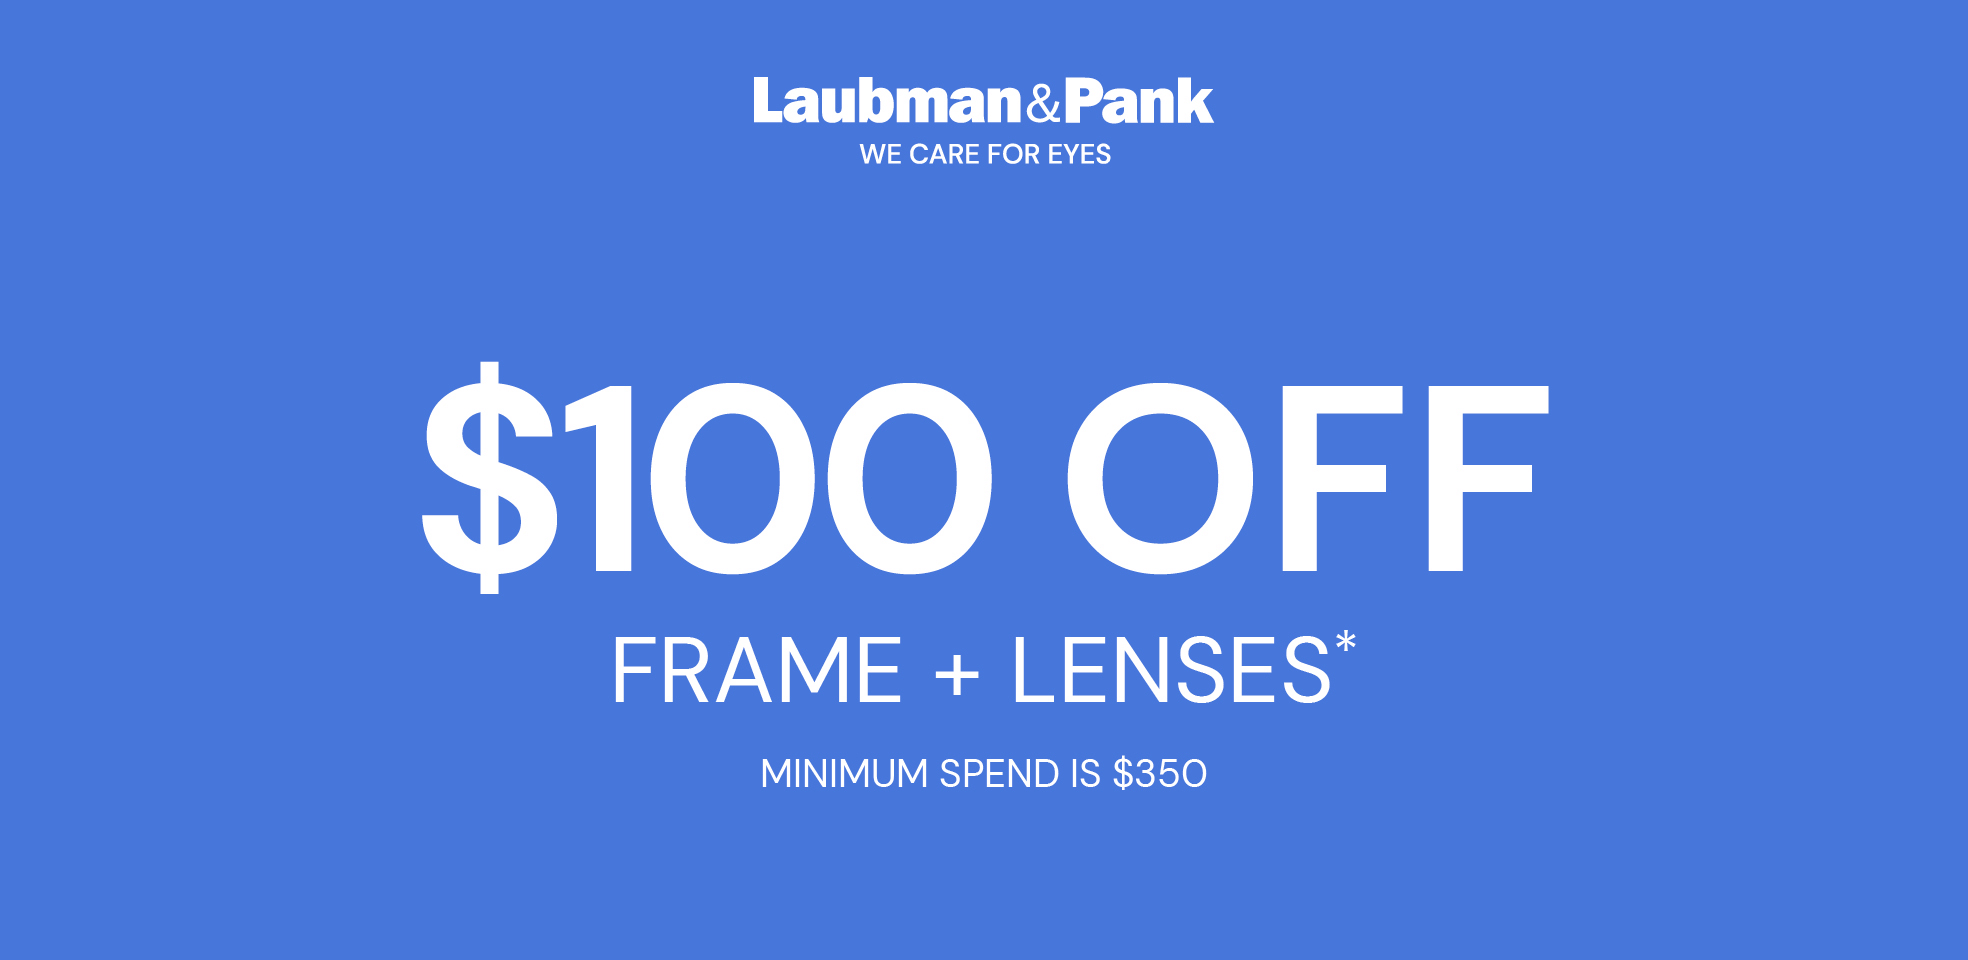 Laubman  Pank - Campaign 612 - Save on Frame and Lenses at Laubman  Pank - EN - 1968x960.png